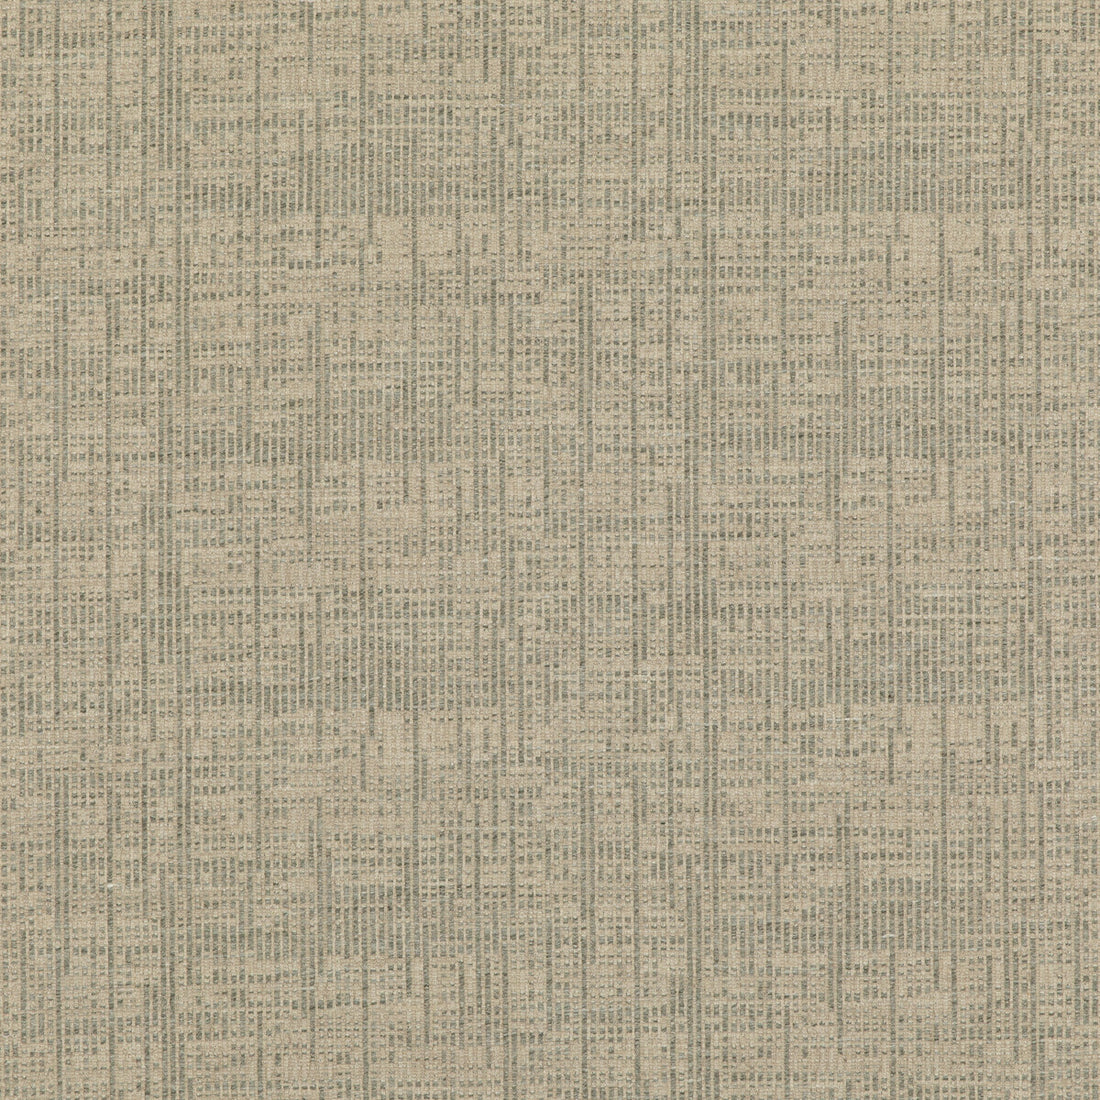 Umbra fabric in mineral color - pattern ED85327.705.0 - by Threads in the Luxury Weaves II collection